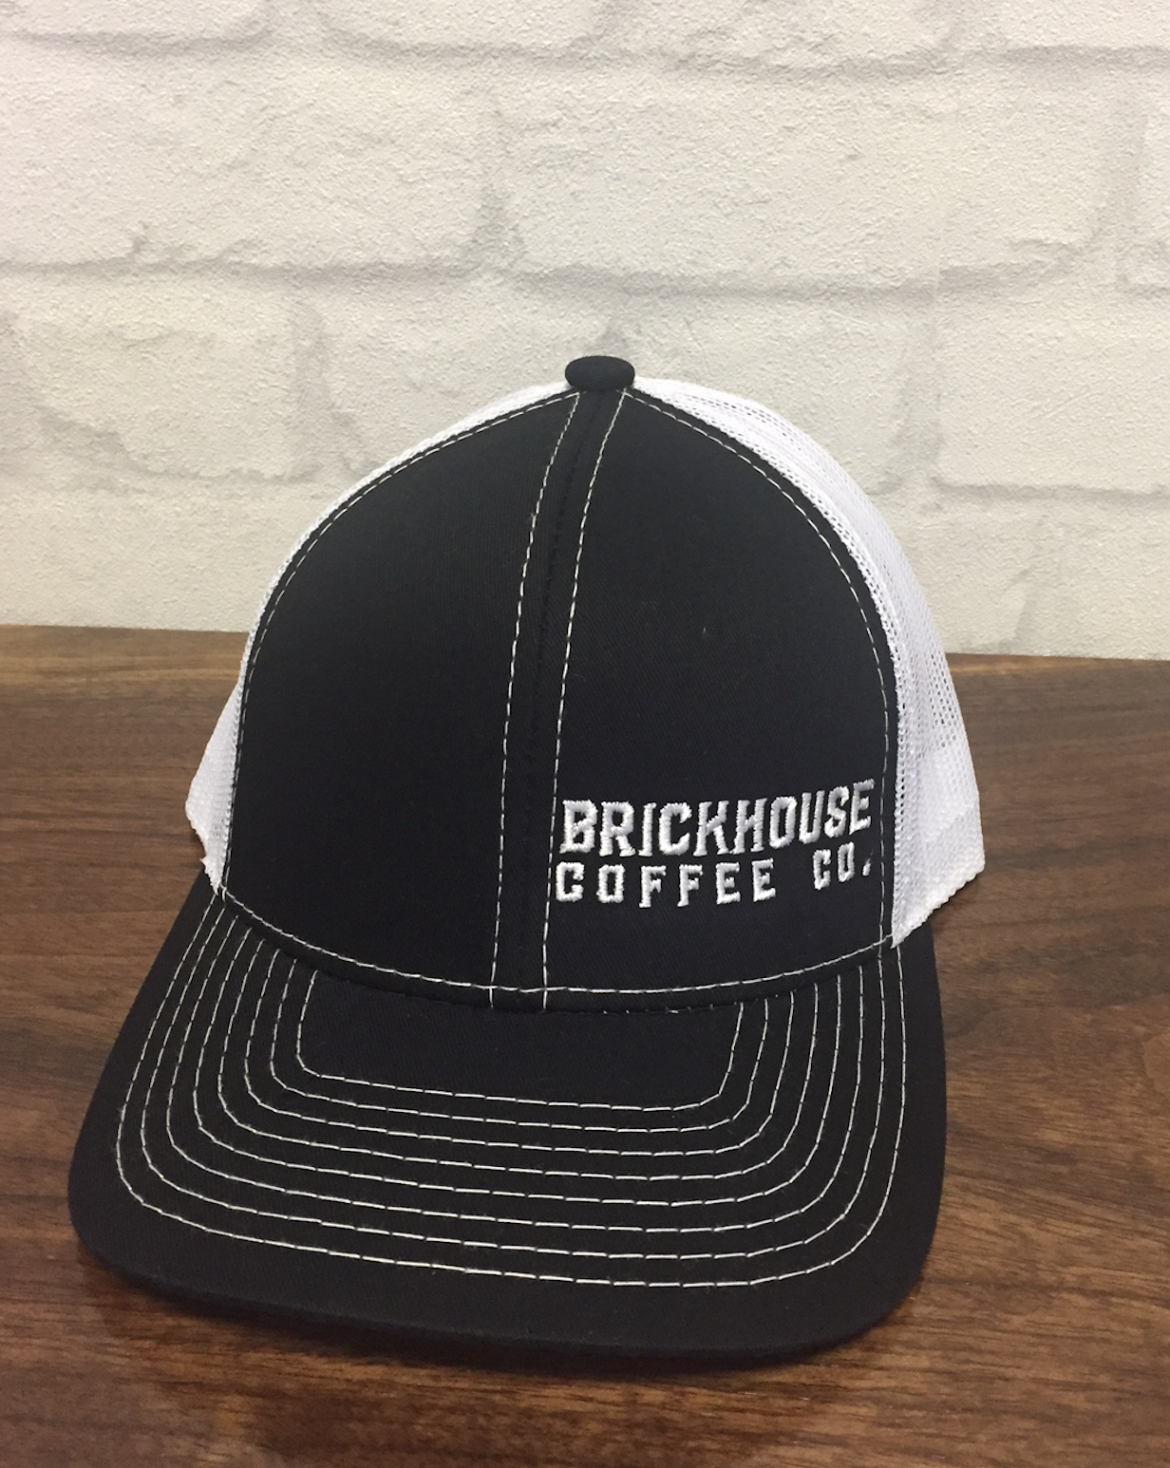 Why Use Custom Logo Hats for Promoting Your Brand